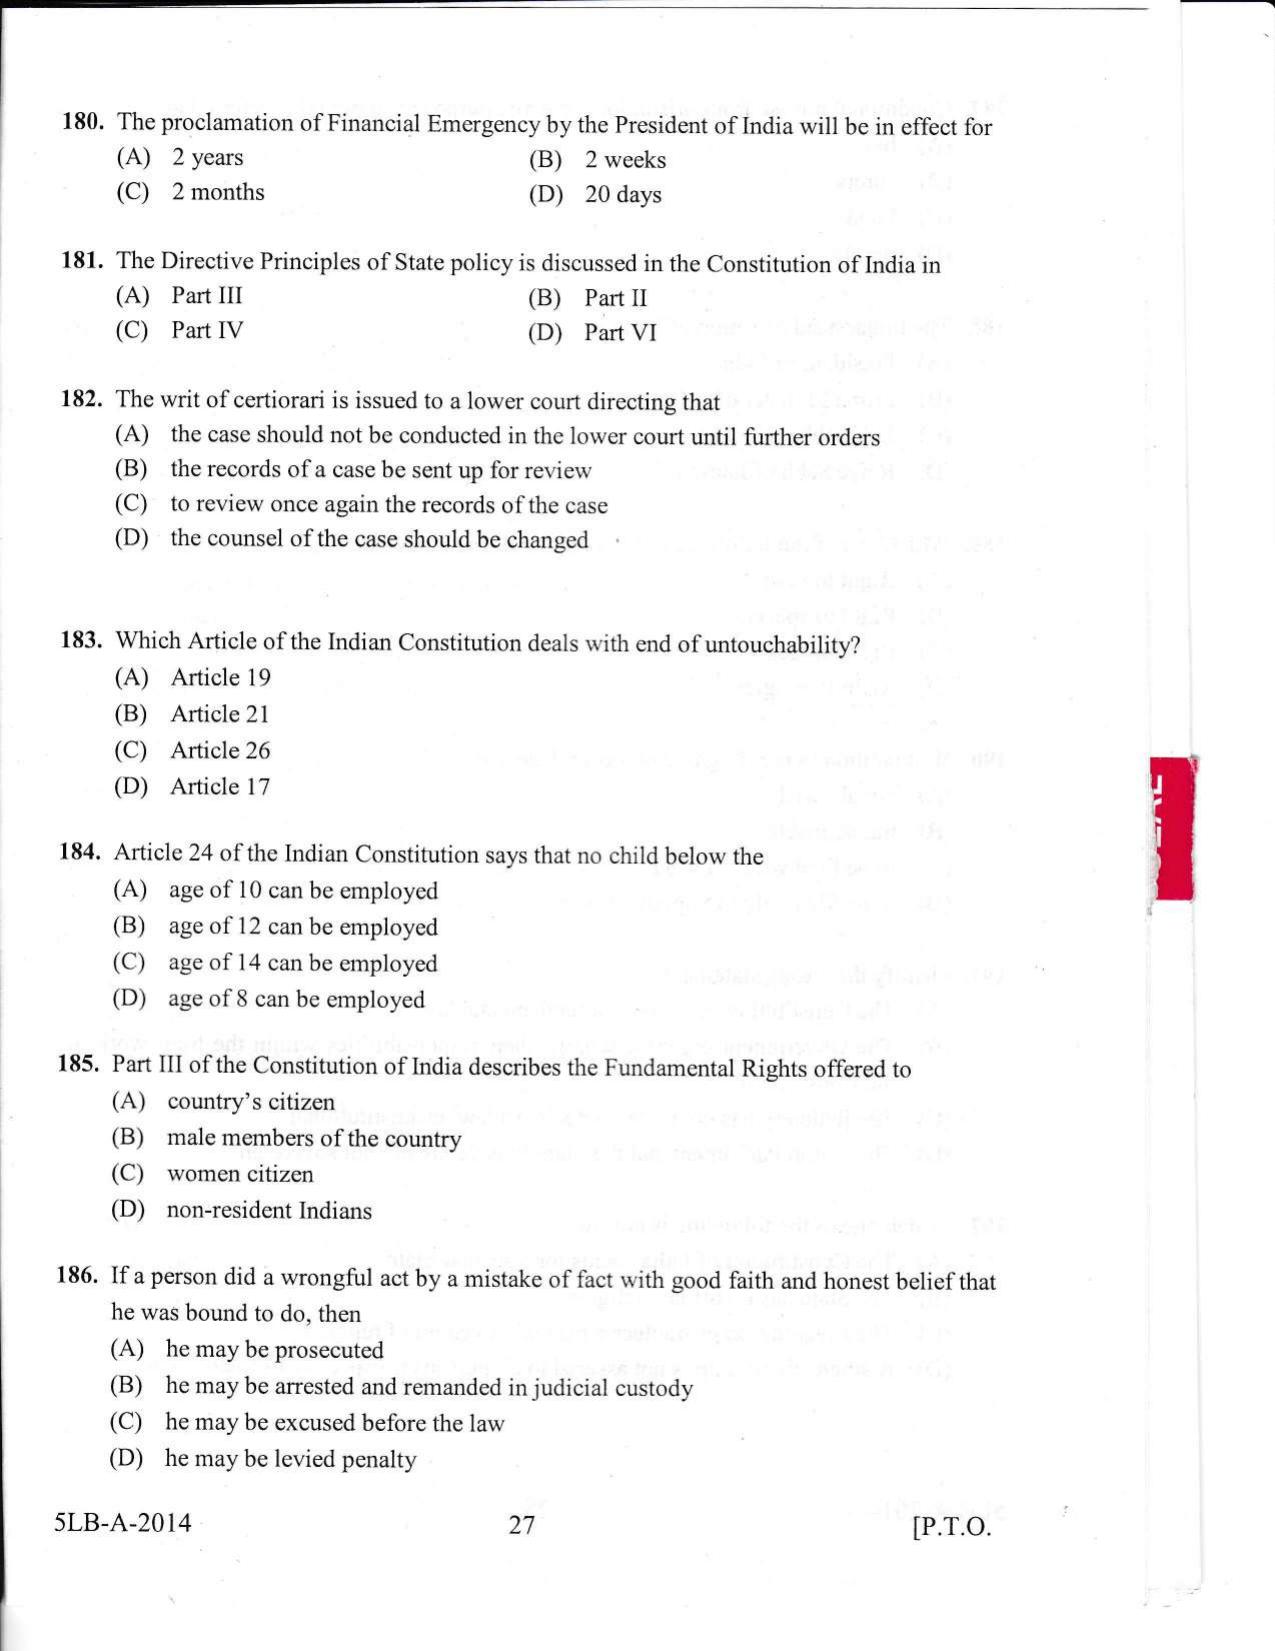 KLEE 5 Year LLB Exam 2014 Question Paper - Page 27